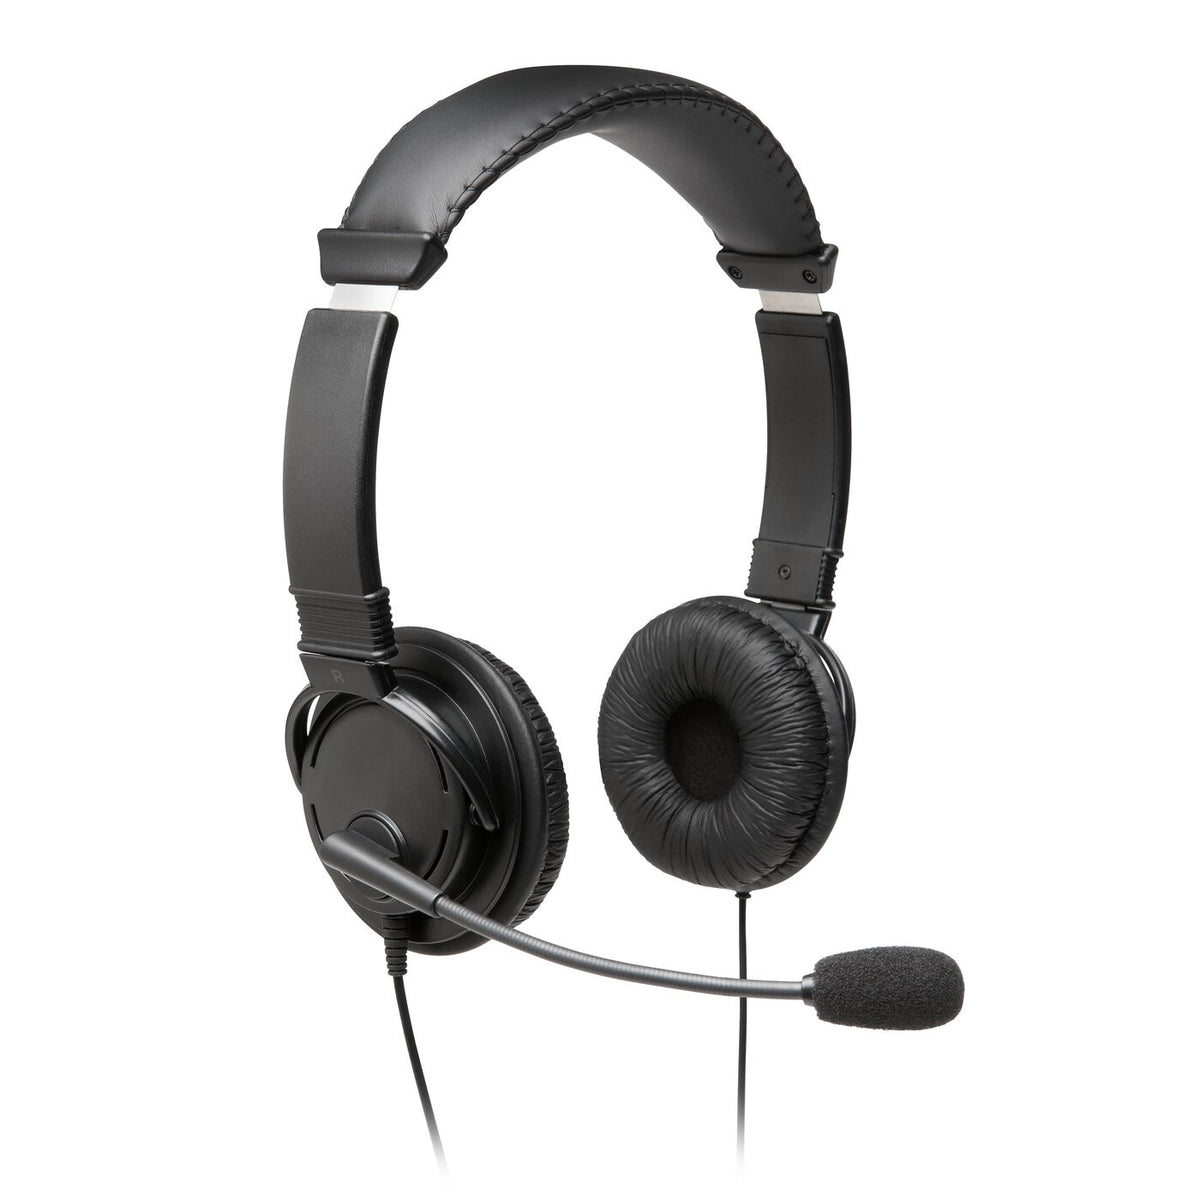 Kensington - Classic USB-A Wired Headset with Microphone